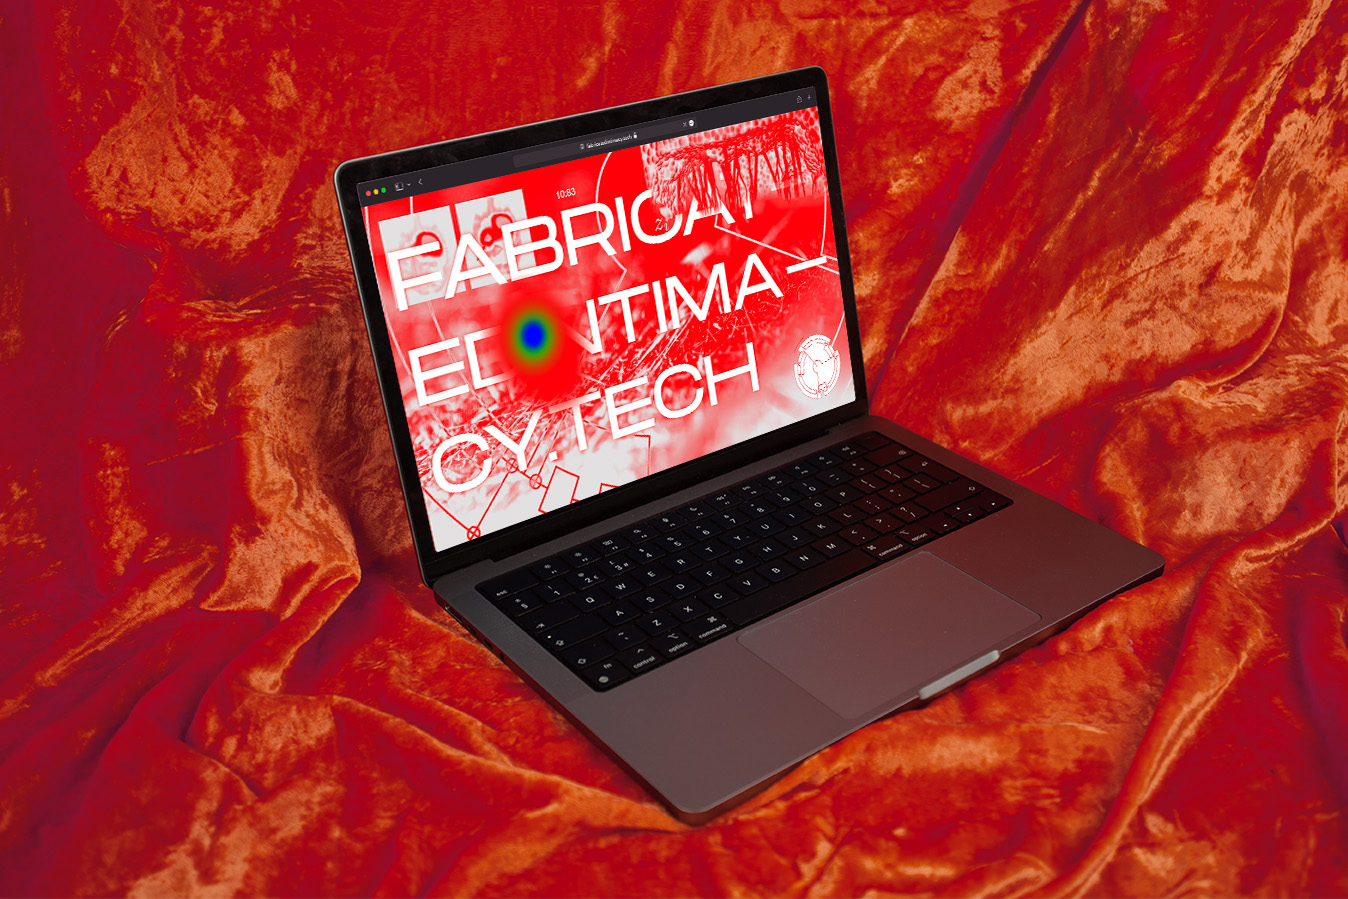 alt: A laptop ontop of a nicely lit bright orange fabric, on the laptop screen is the Fabricated Intimacy website